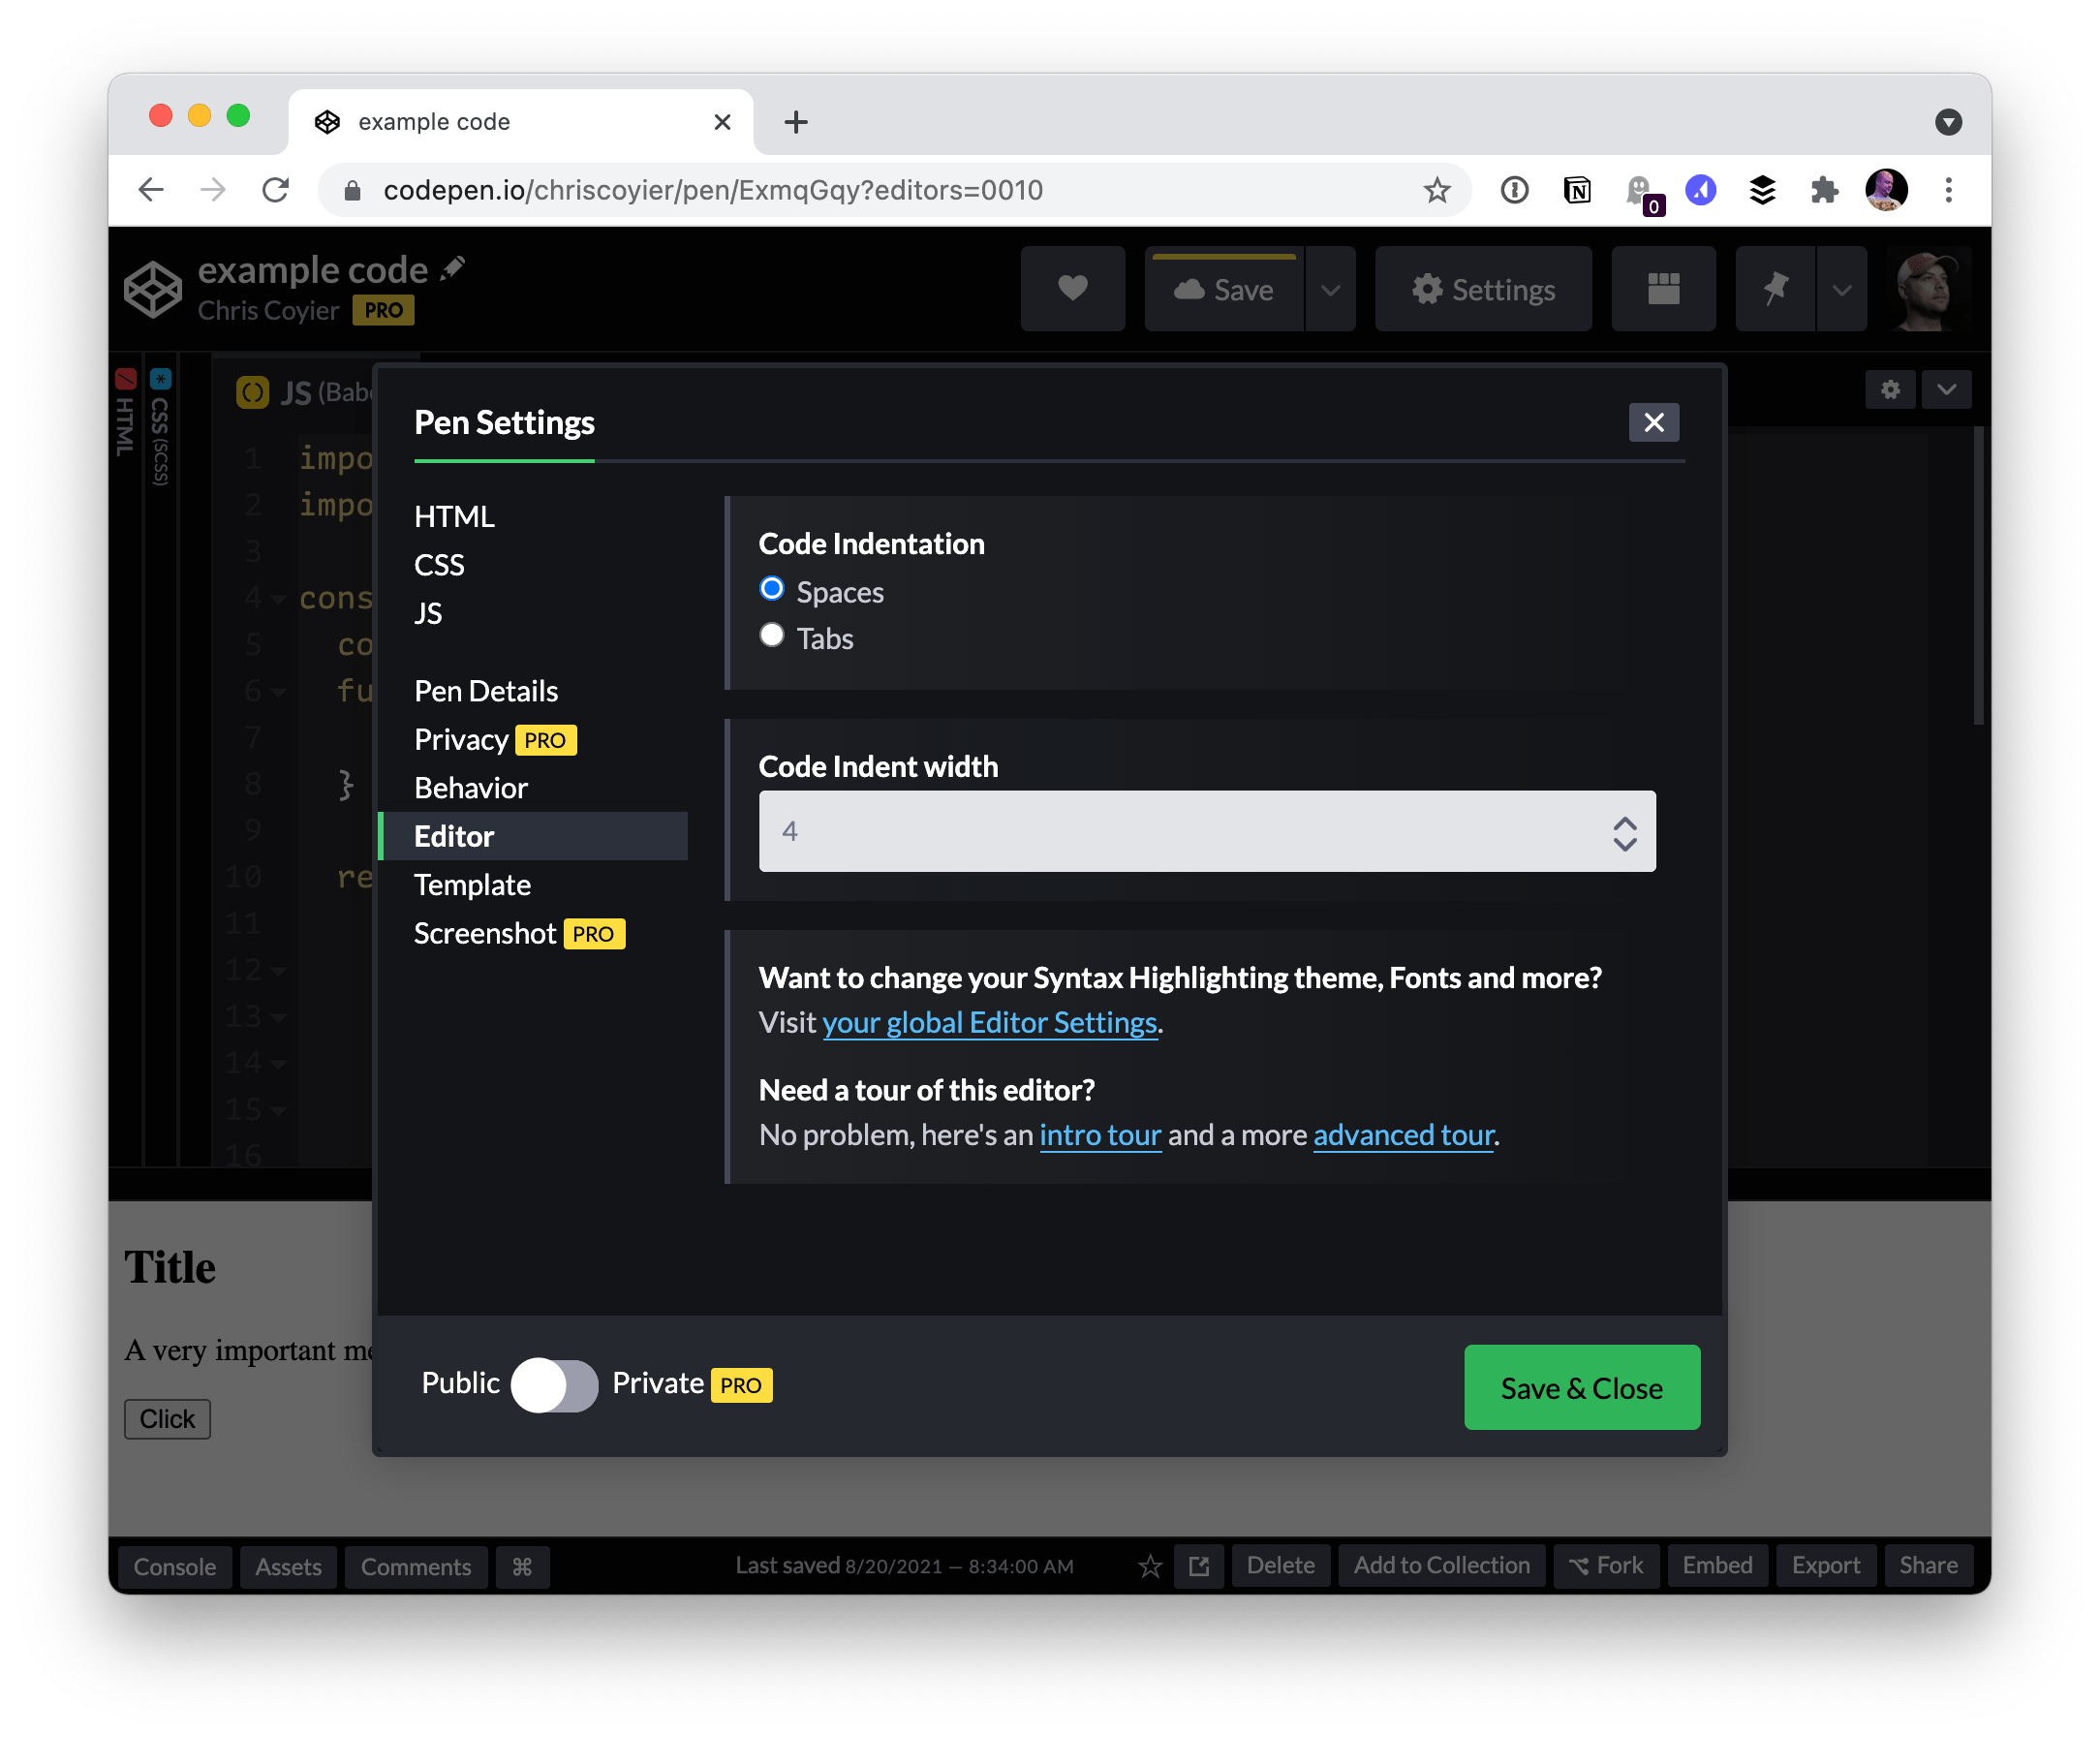 Showing the Pen Settings modal open in CodePen over a demo. the settings show code indentation options for spaces and tabs and for indentation width.